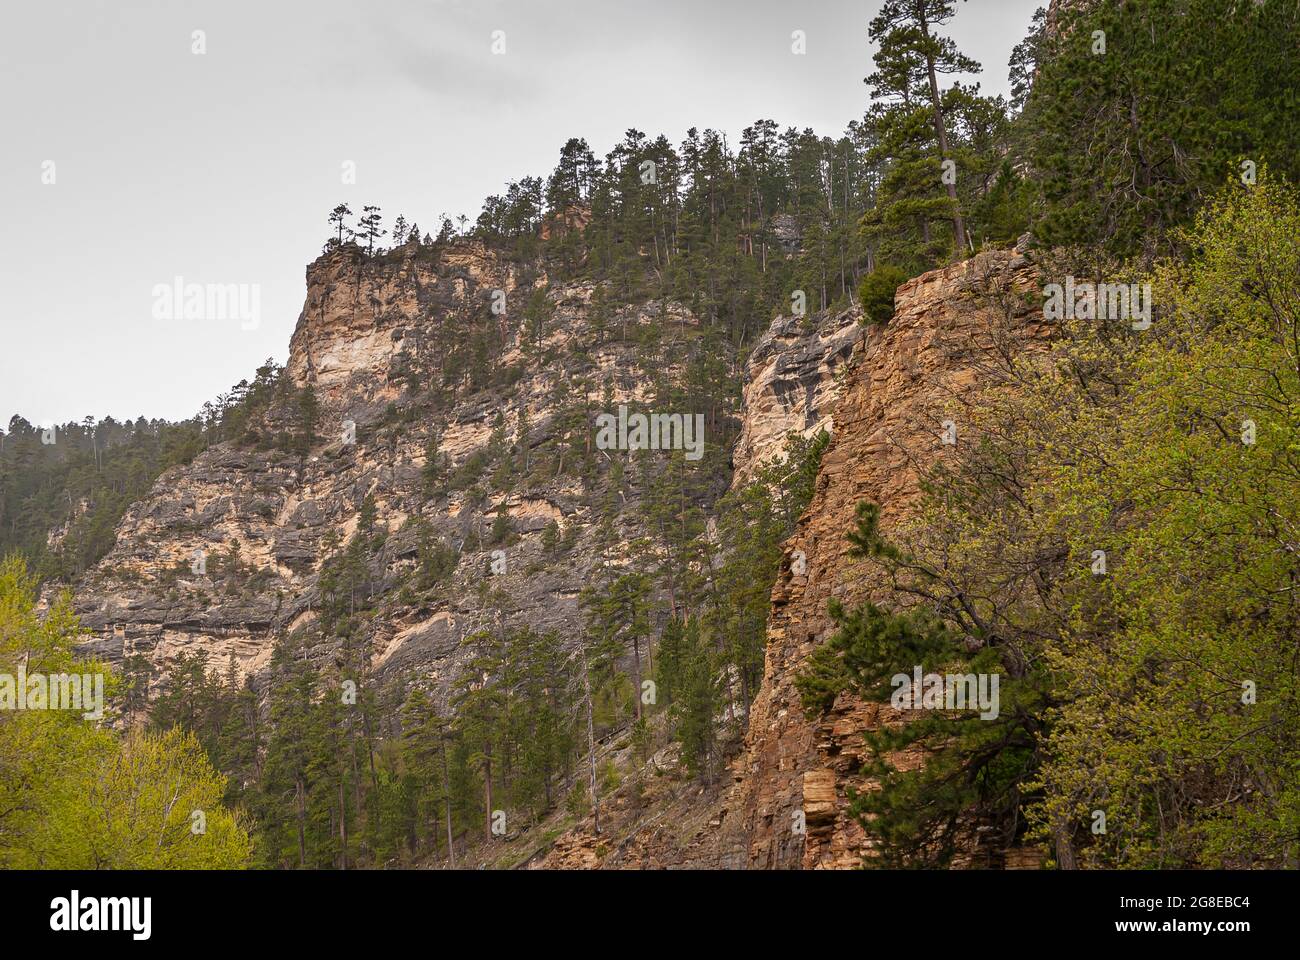 Black Hills National Forest, SD, USA - May 31, 2008: Wider and longer shot of brown-beige-black rocky cliff under silver sky. Green foliage on all sid Stock Photo